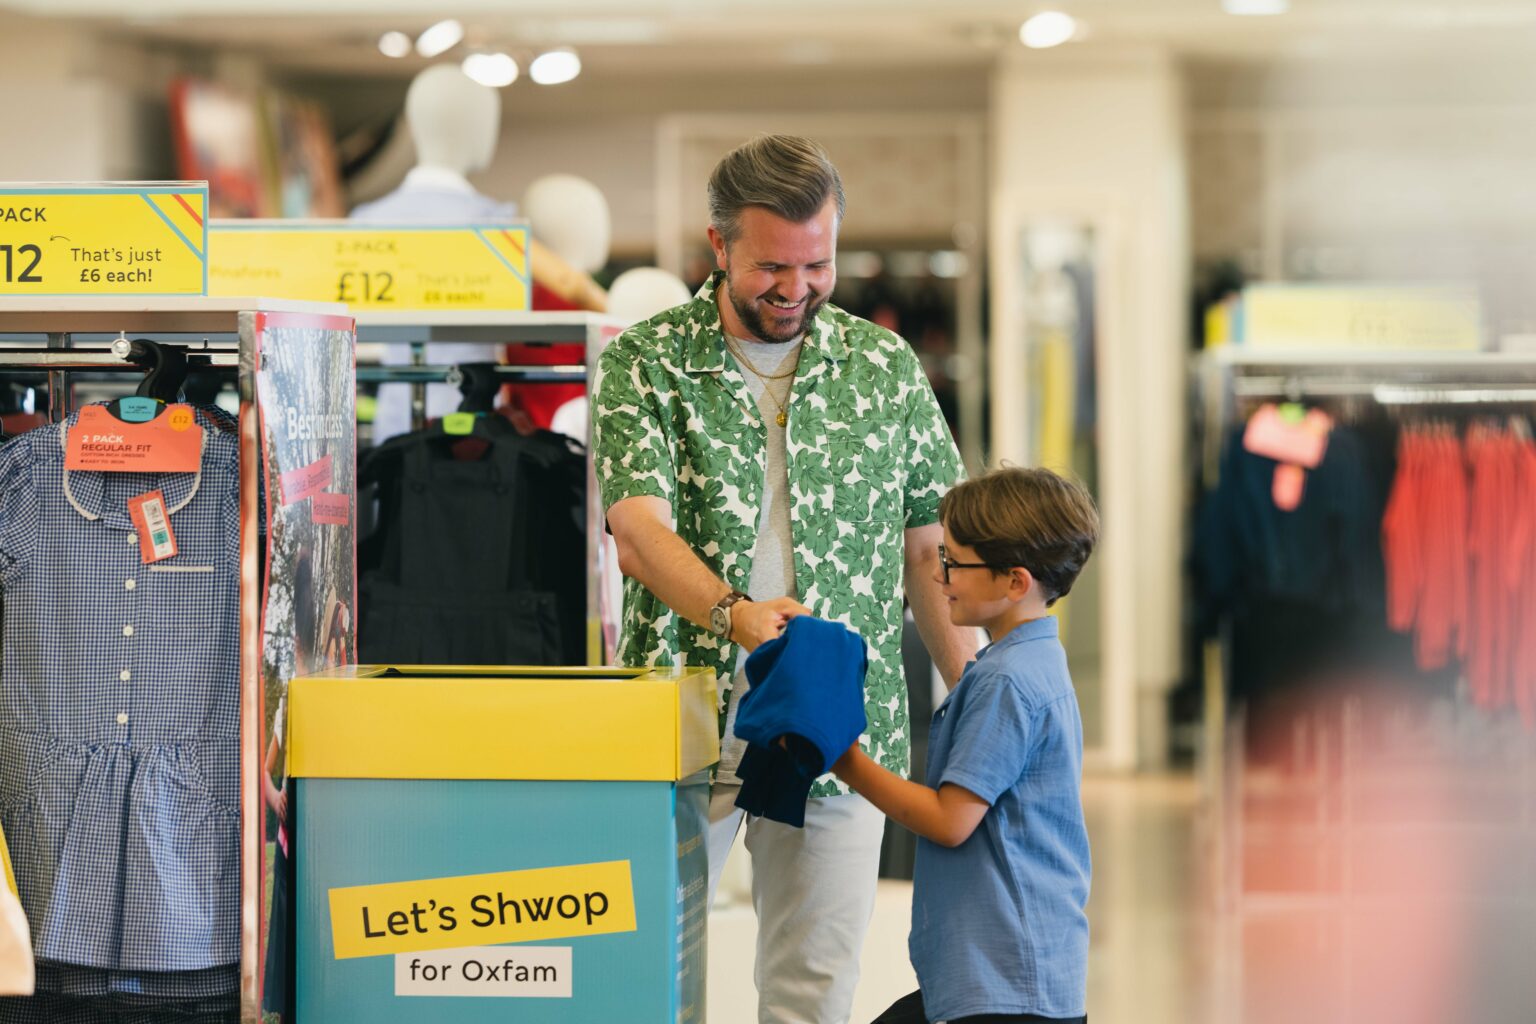 A father and son donating clothes to the new 'Let's Shwop' box in M&S. 